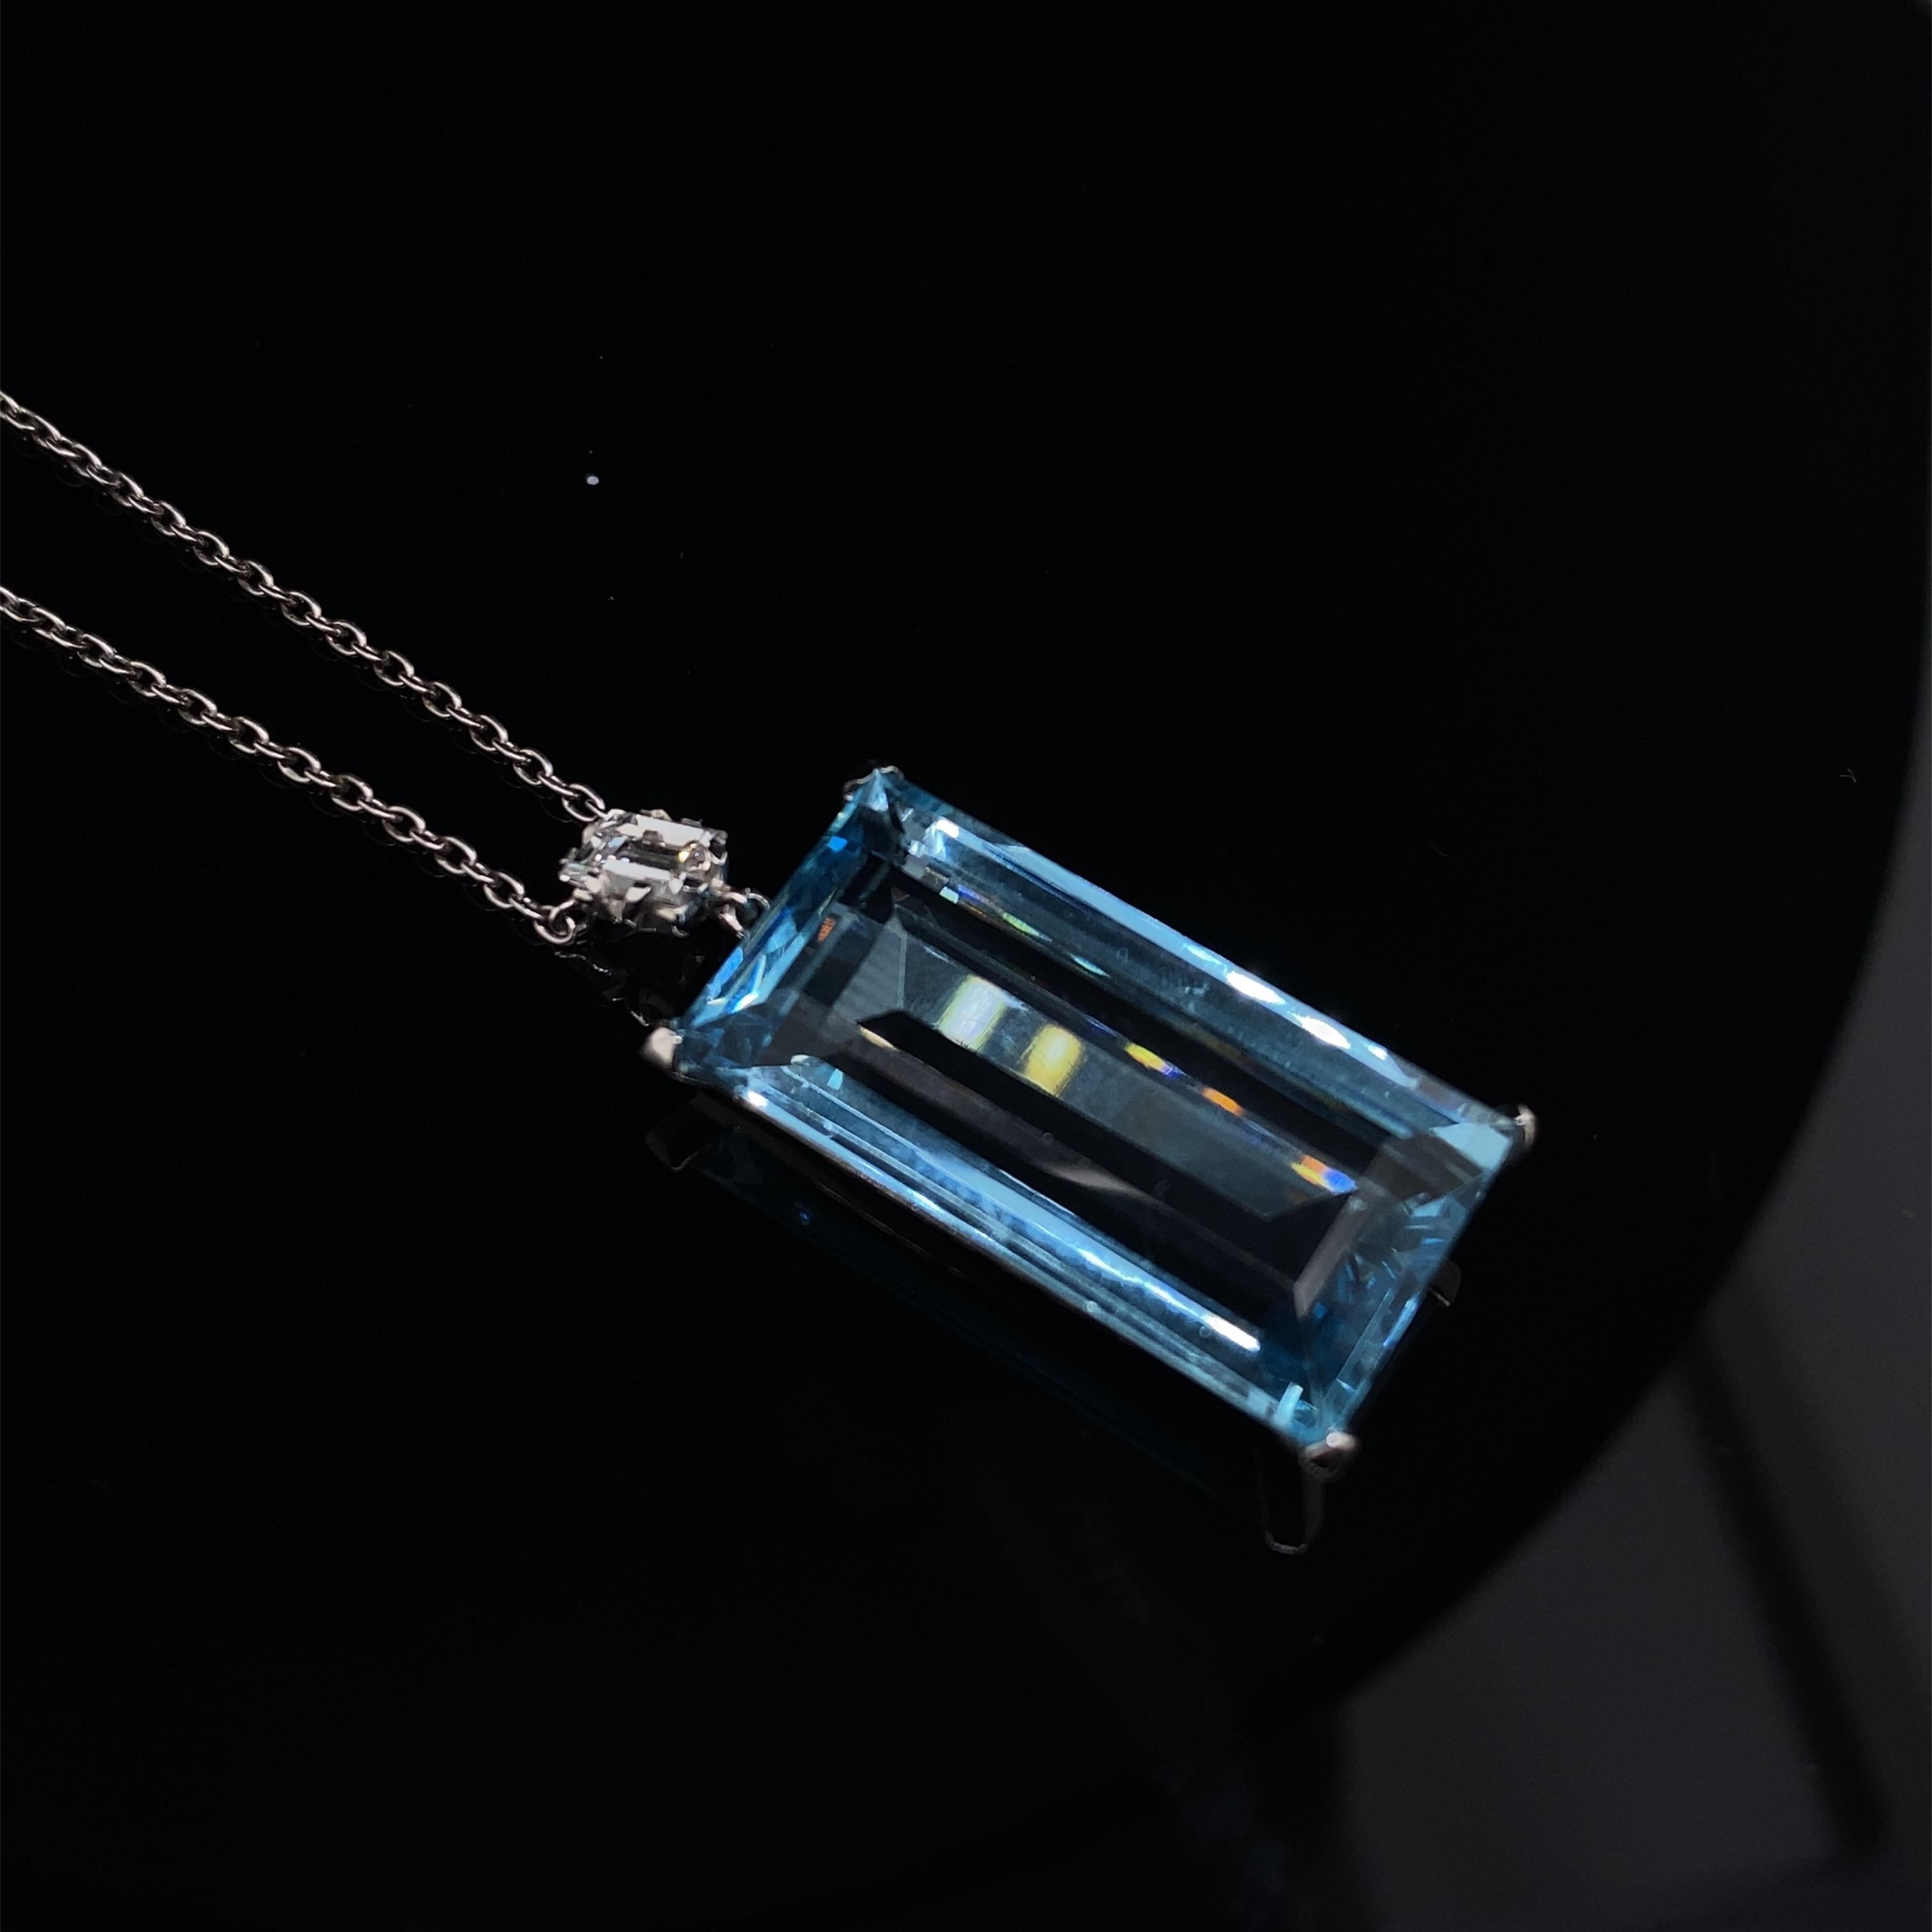 Art Deco style 17ct aquamarine and diamond pendant set in 18 karat white gold.

This unusual necklace is predominantly set with a bright blue aquamarine, assessed by us as 17 carats approximately. The aquamarine is mounted in a discreet yet secure 4